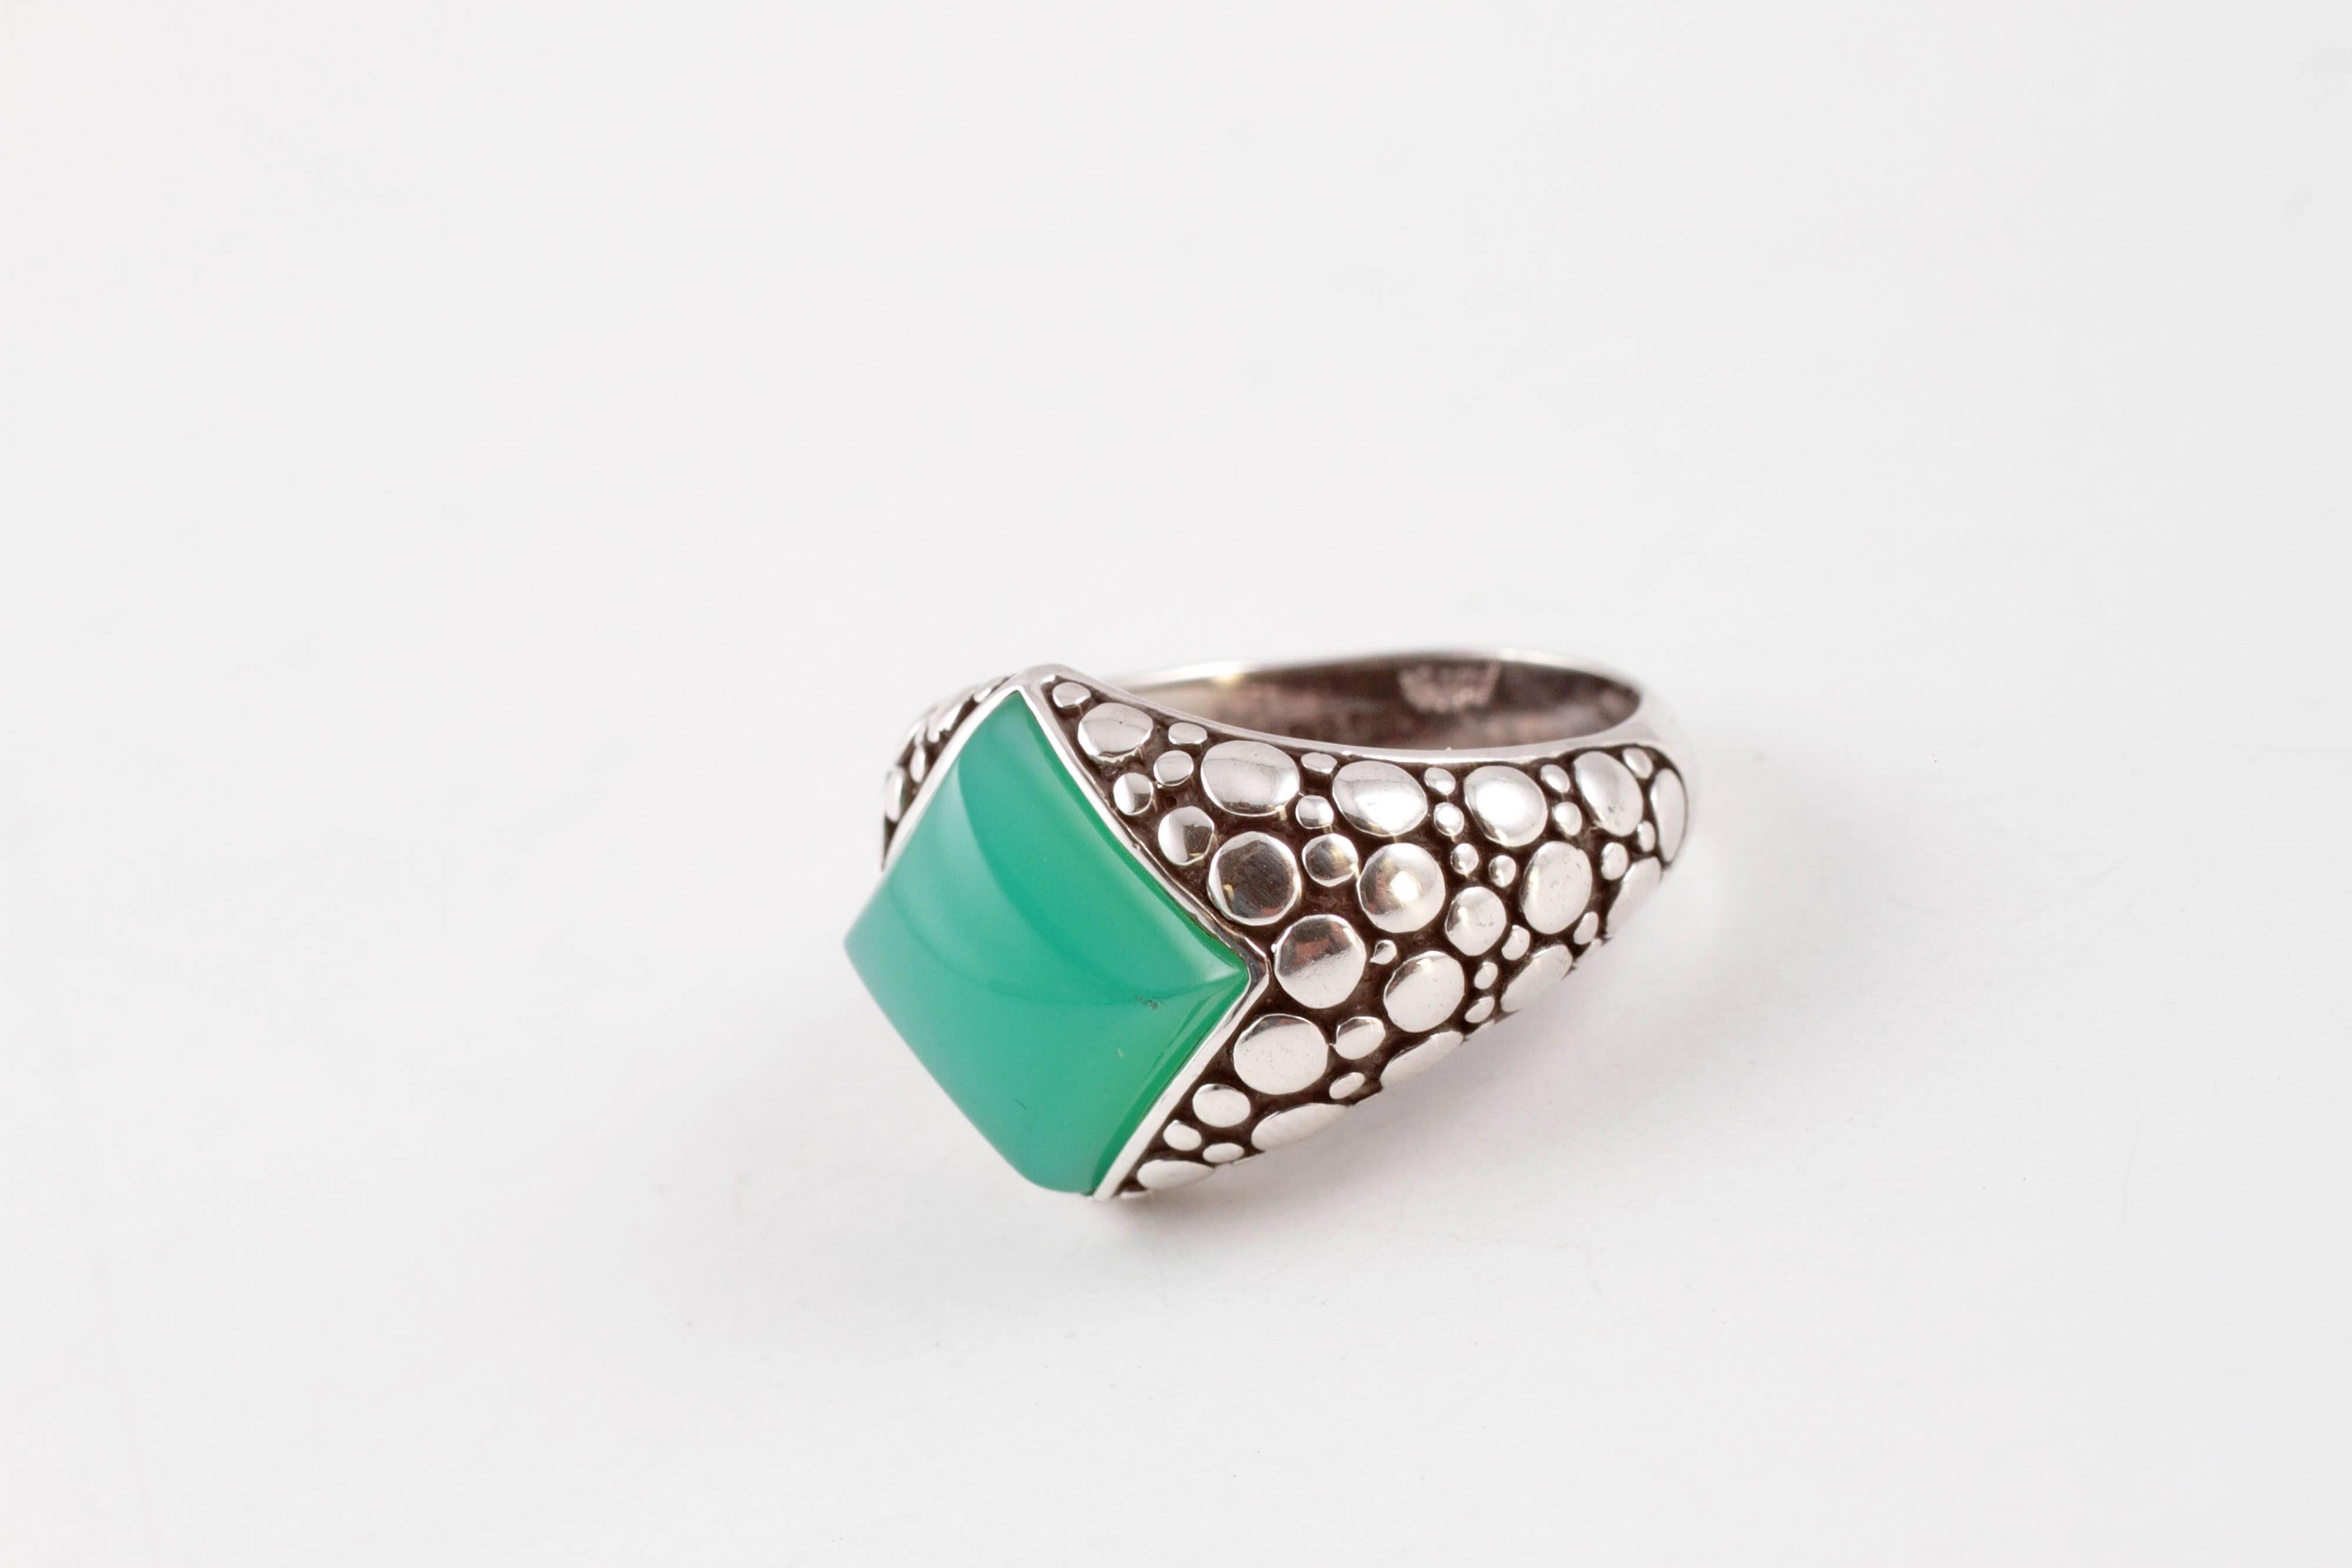 Colorful John Hardy ring with cabochon chrysoprase.  Size 6.5 in sterling silver Dot pattern.